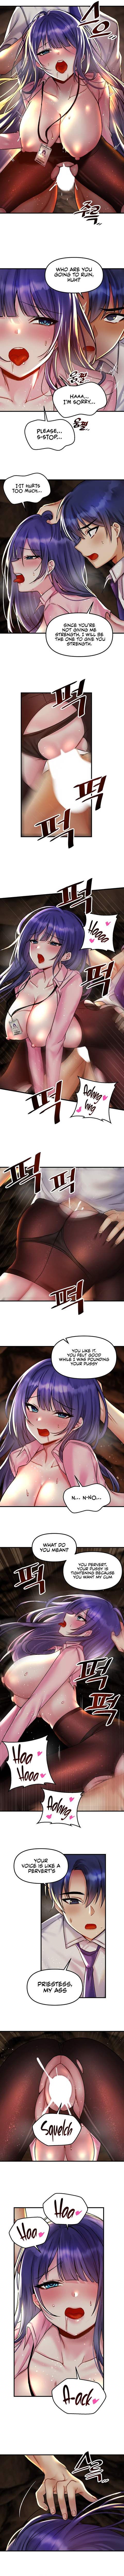 trapped-in-the-academys-eroge-chap-30-5